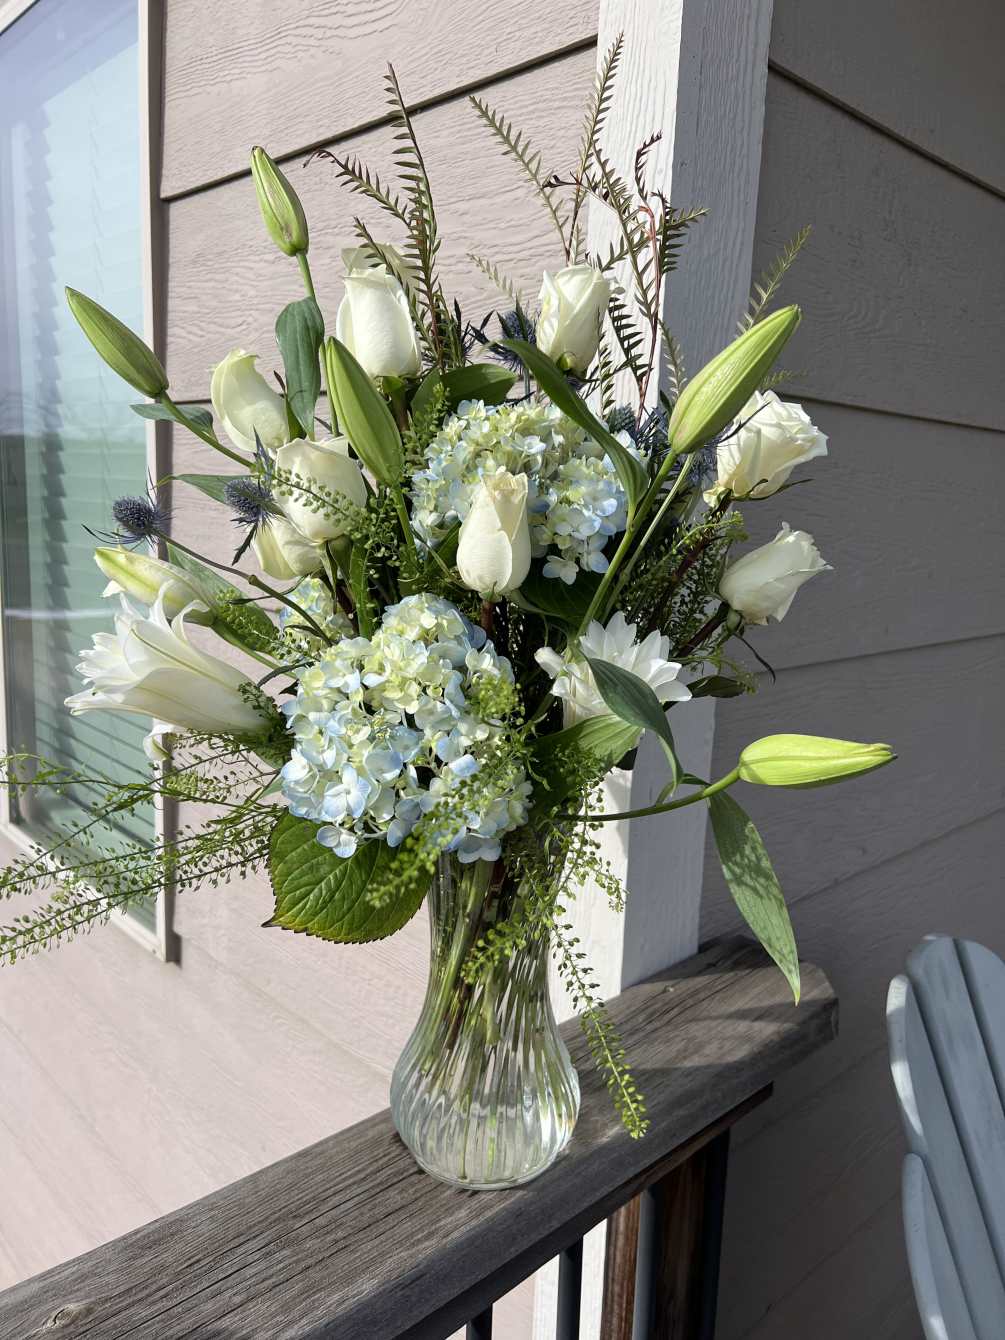 Blue hydrangeas, white roses and white lilies 